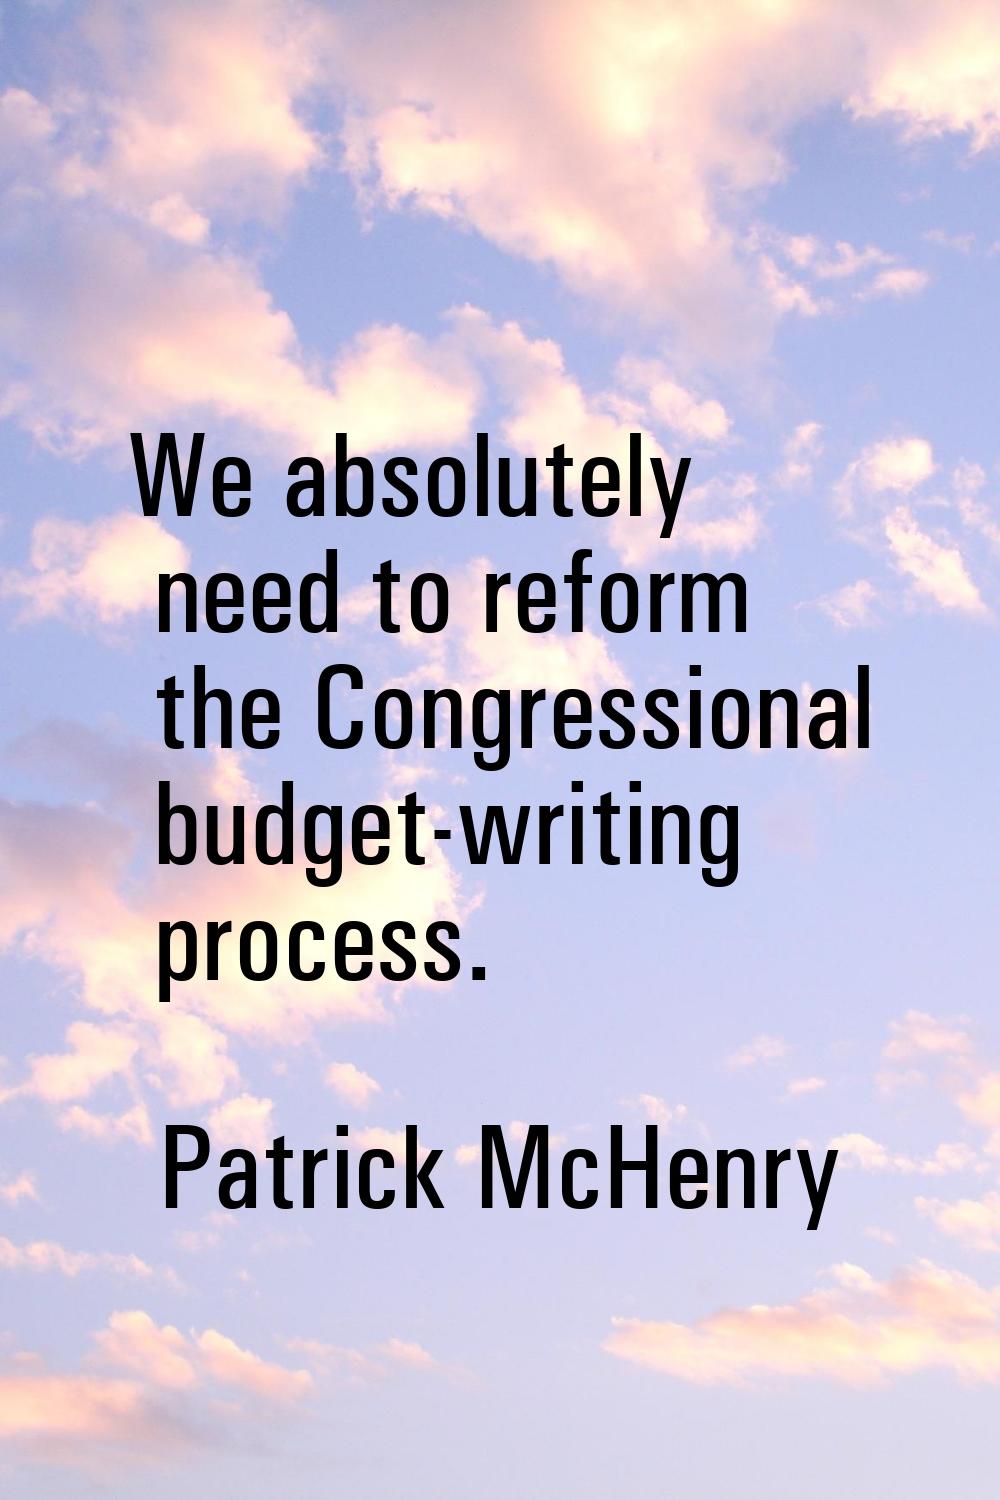 We absolutely need to reform the Congressional budget-writing process.